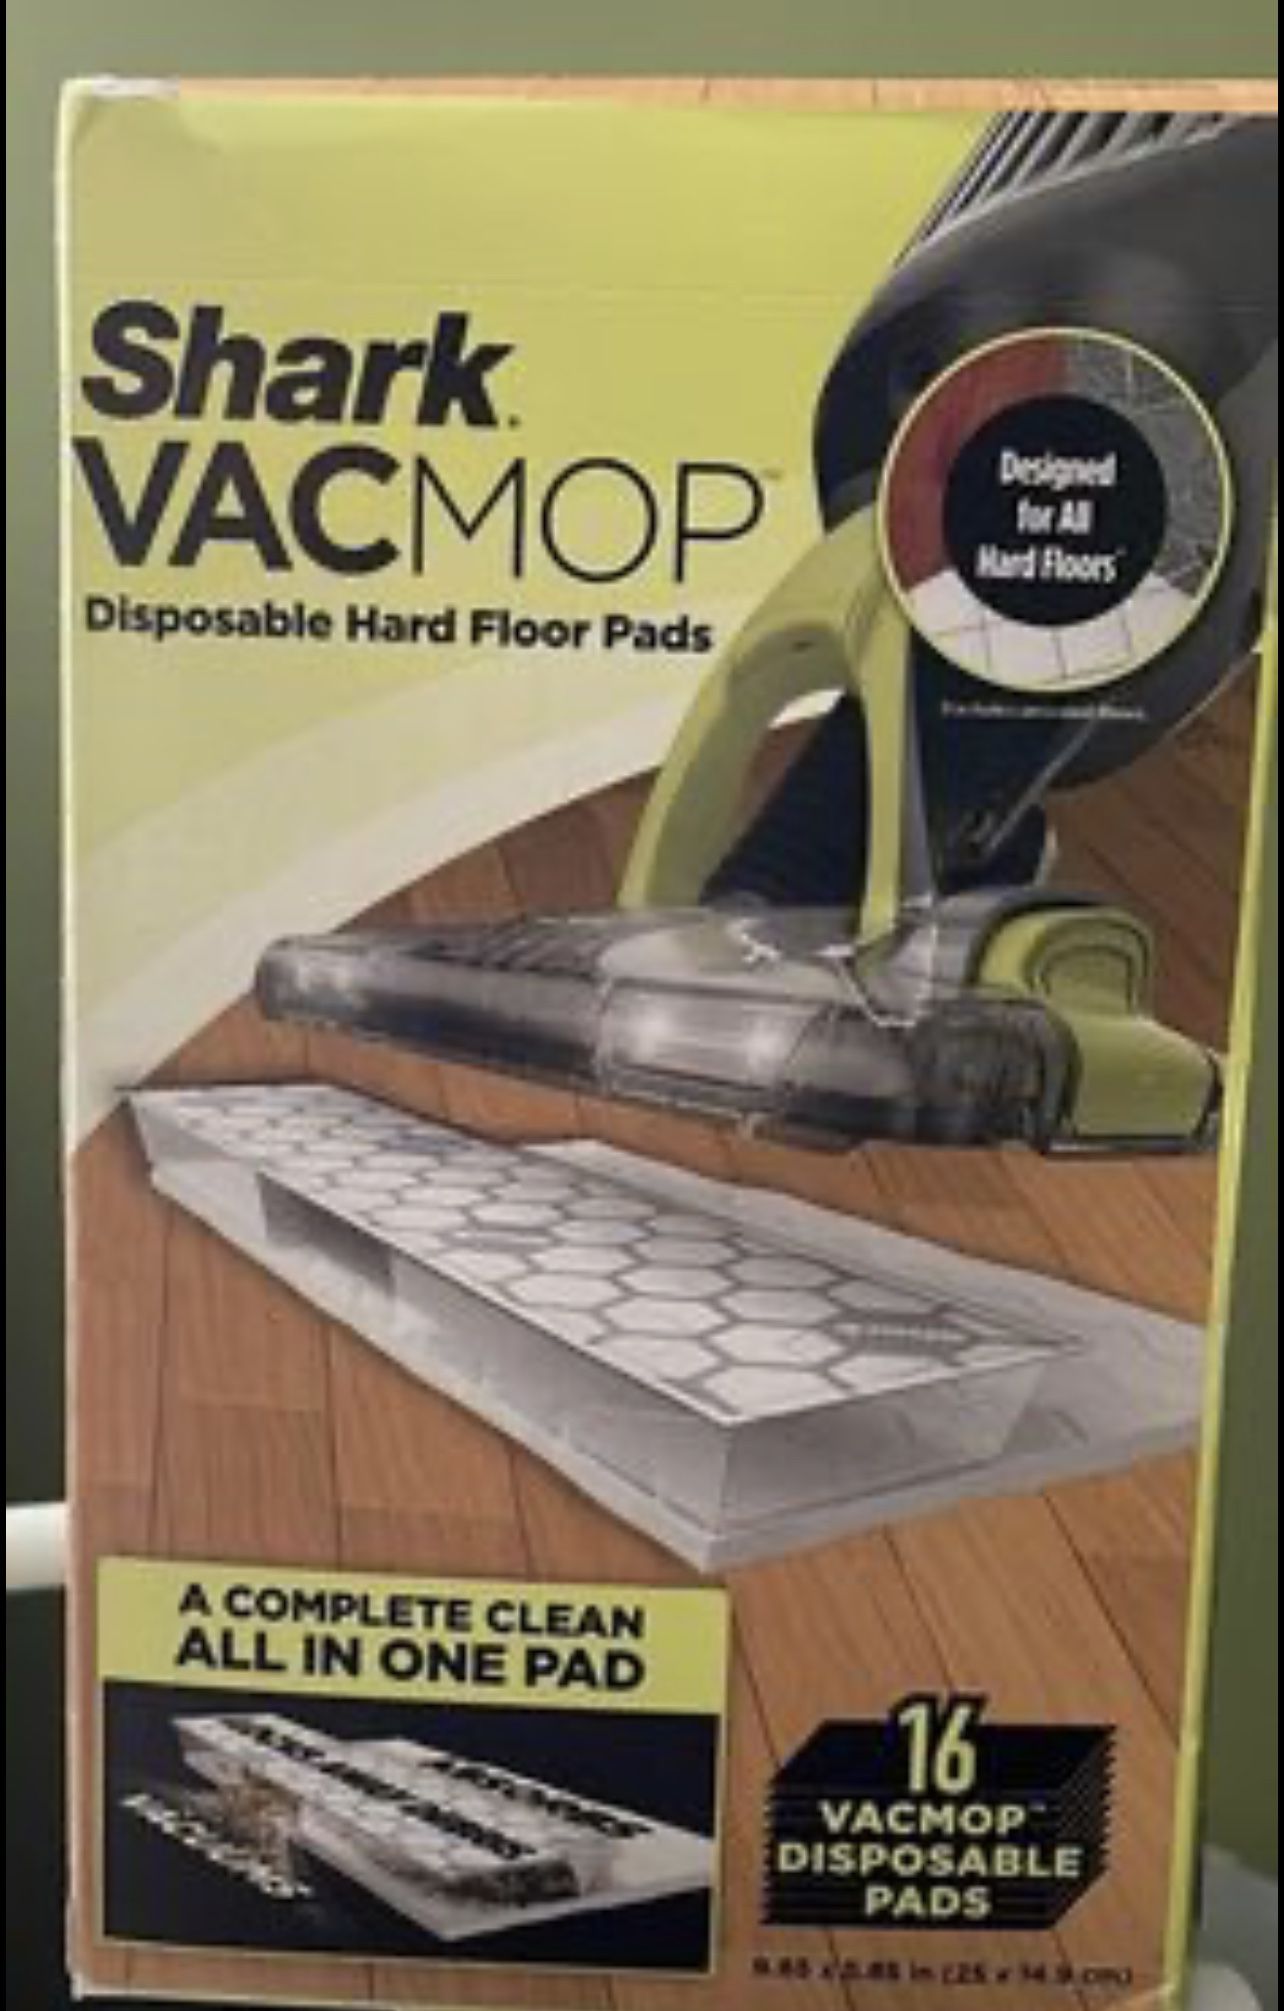 Shark Vacmop Cordless Hard Floor System With 3 Boxes Of Disposable Pads. ( 48 Pads)